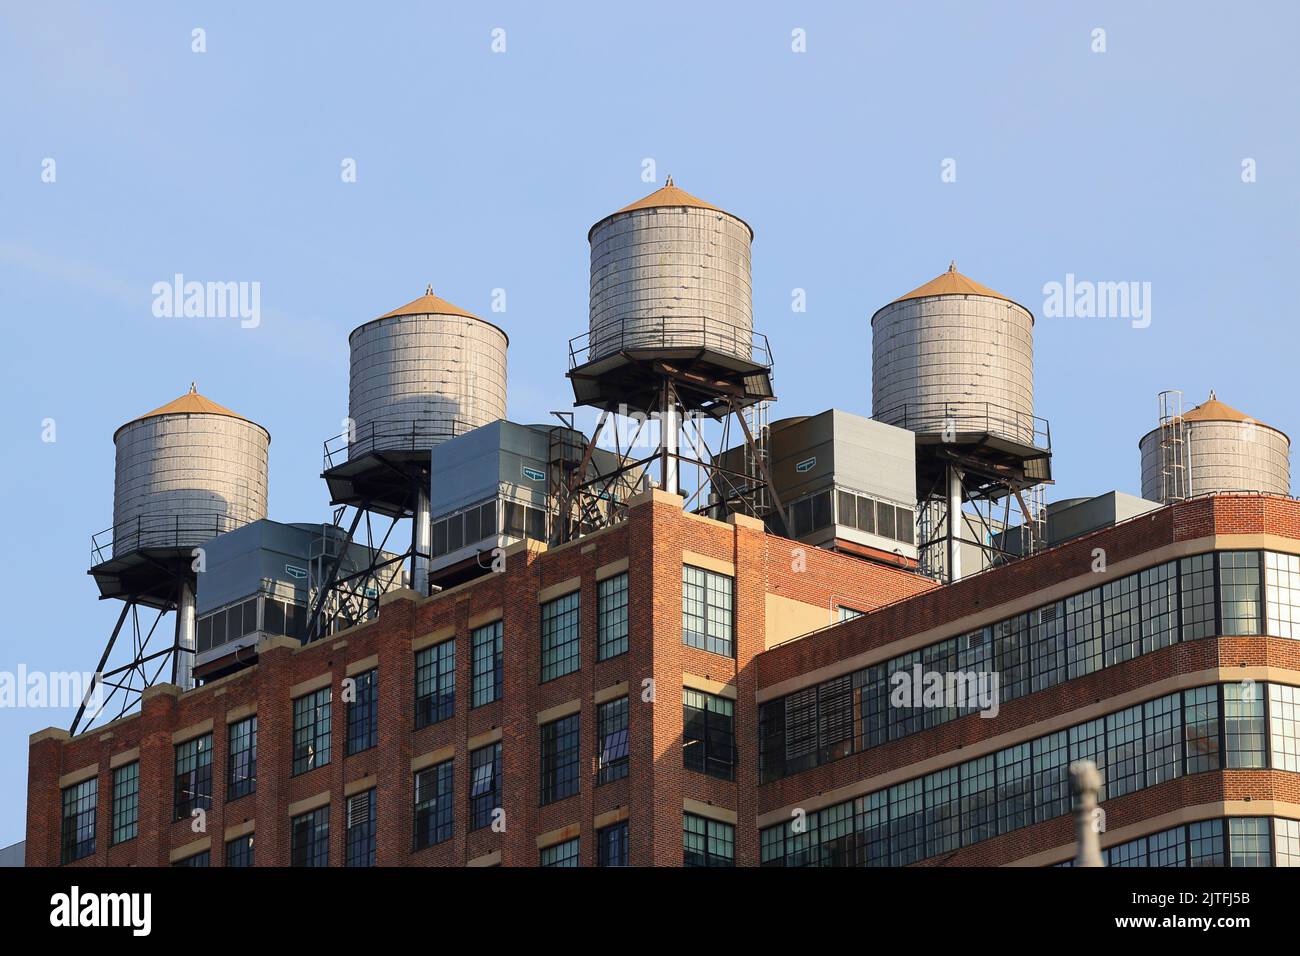 Rosenwach wood water tanks and hvac chiller units on the rooftop of the Starrett-Lehigh warehouse converted office building in New York. Stock Photo